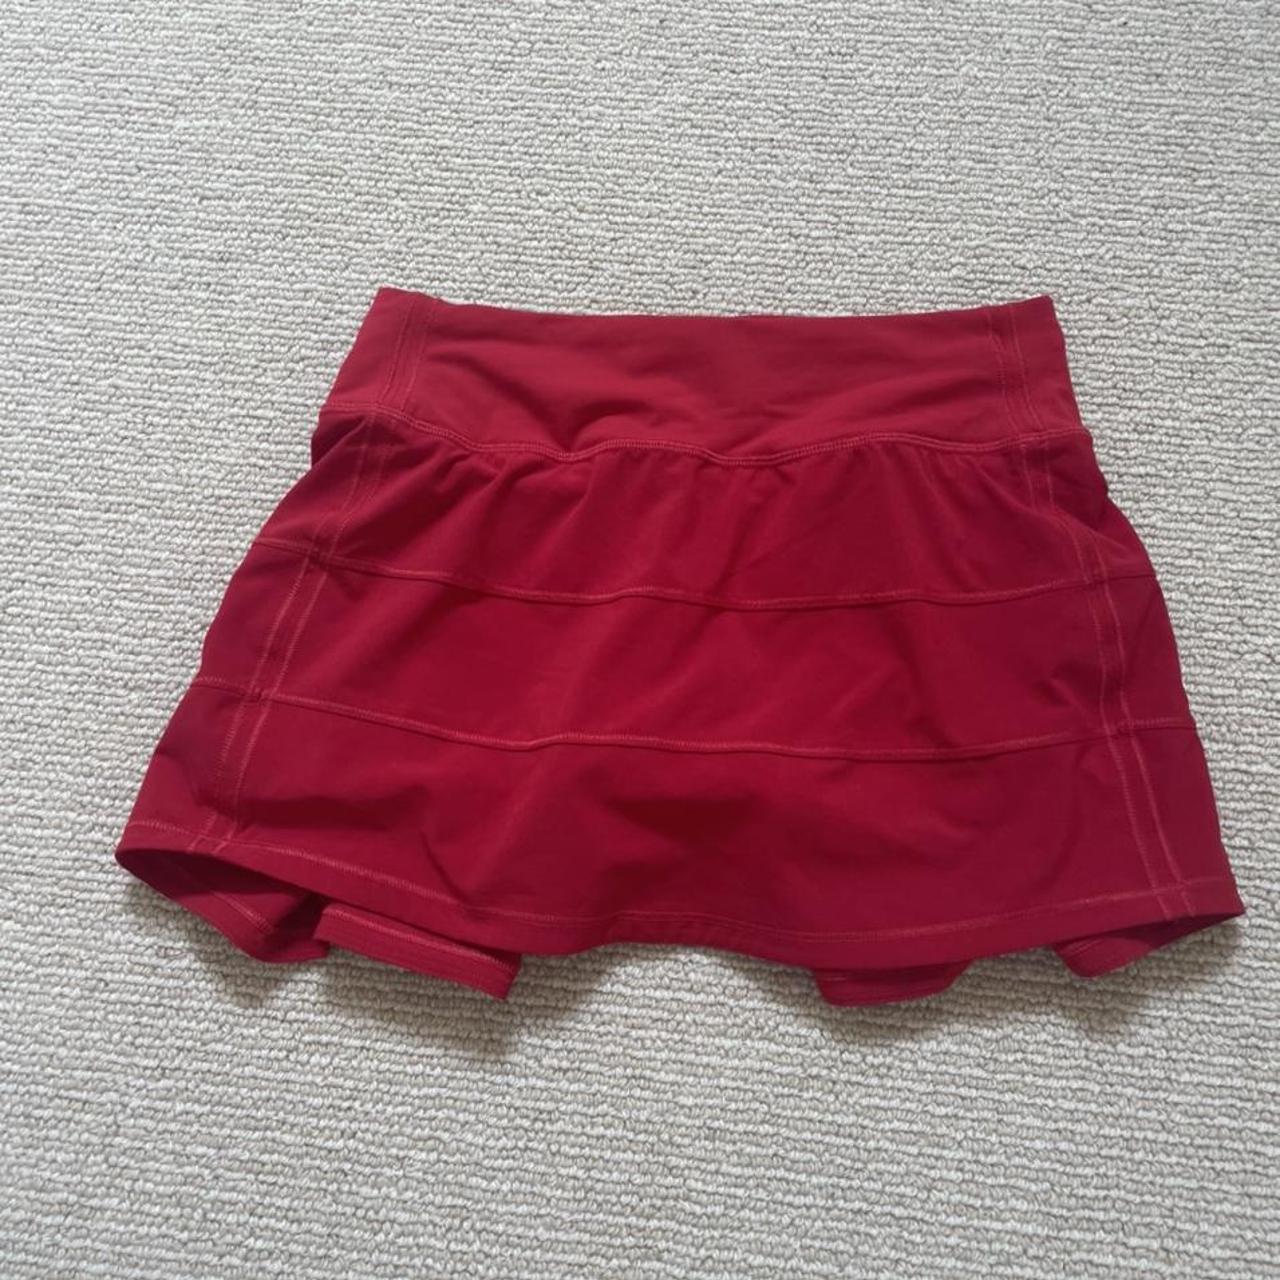 Lululemon red pace rival skirt size 2 fits true to... - Depop